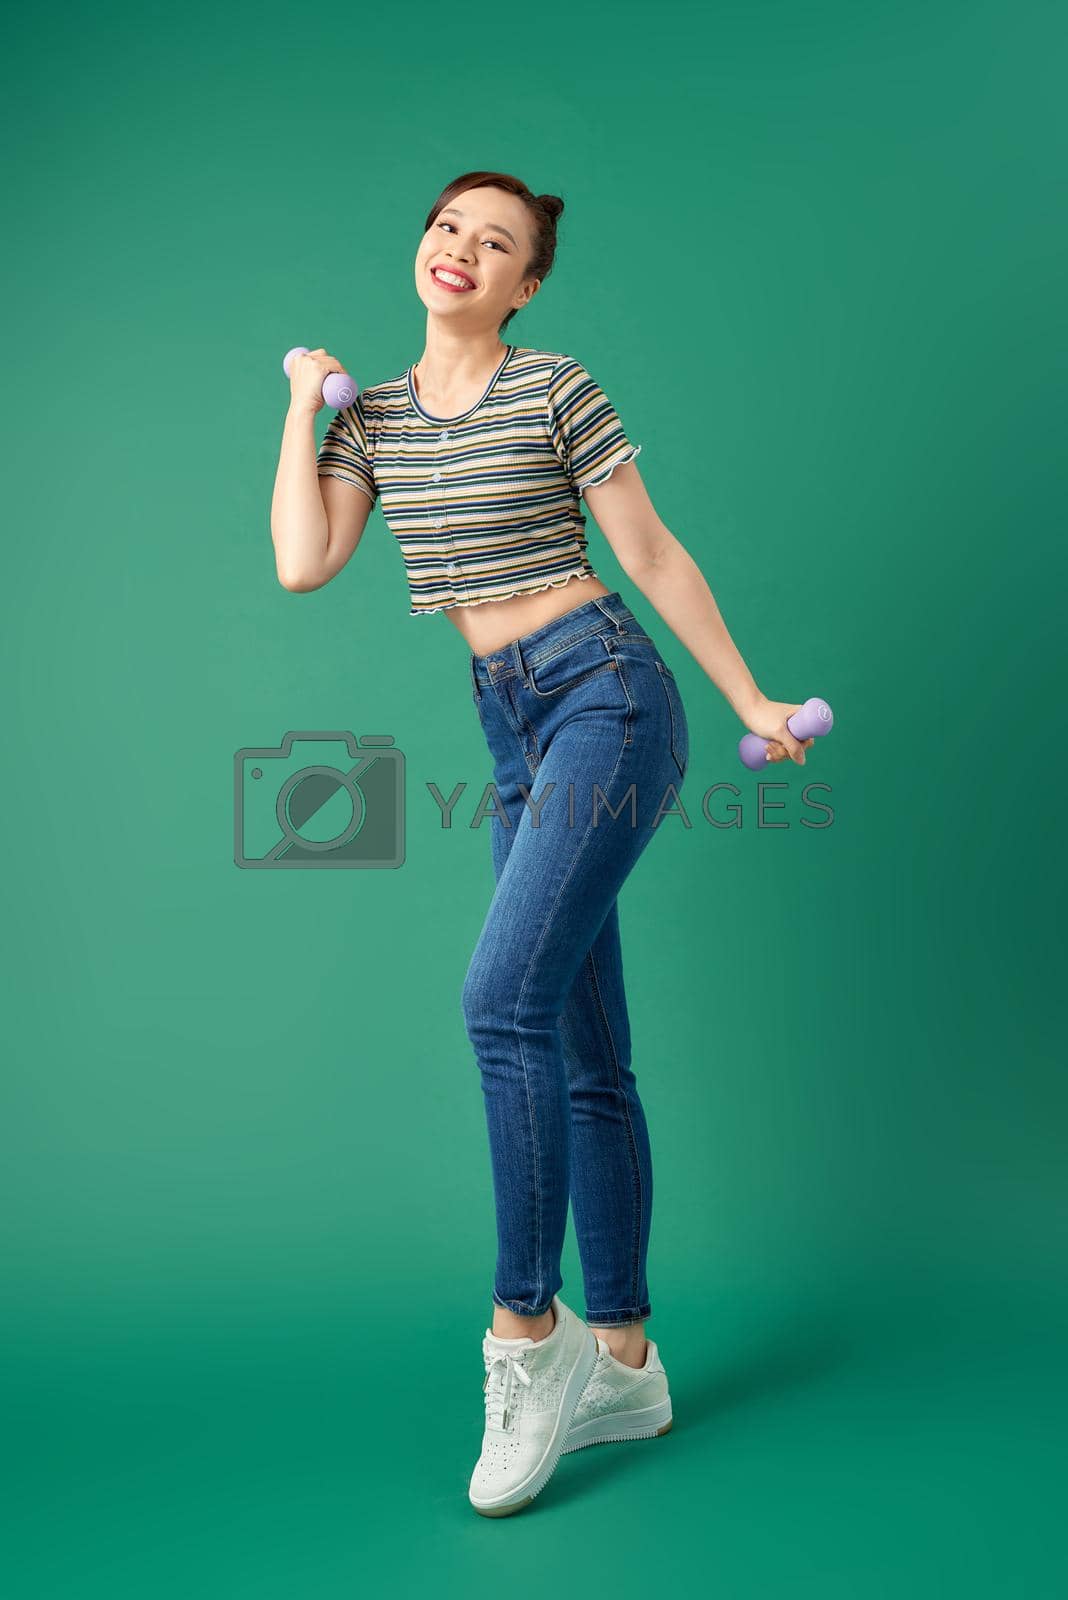 Royalty free image of Attractive young Asian woman holding dumbell while standing over green background. Full length. by makidotvn